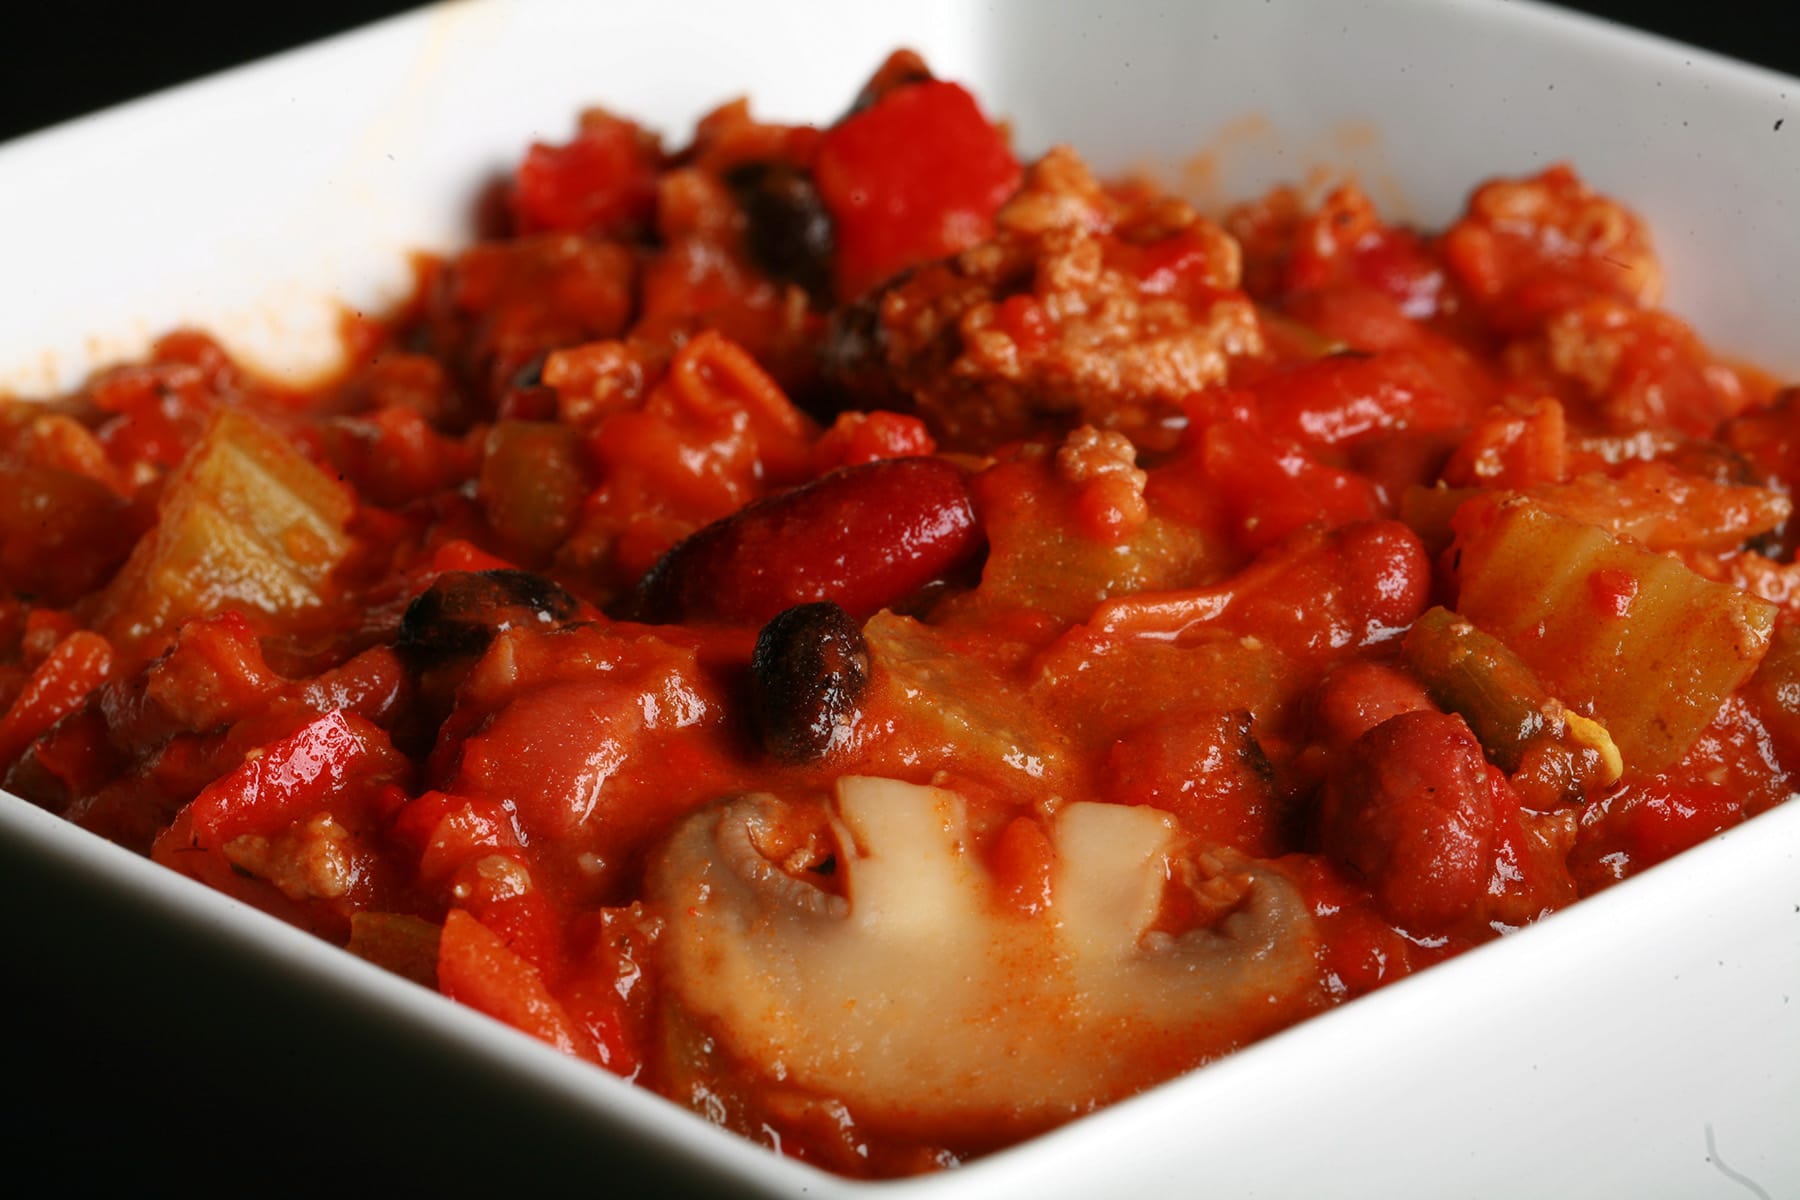 Close up photo of a bowl of roasted convention chili. Kidney beans, ground beef, mushrooms, celery, and red peppers are visible.